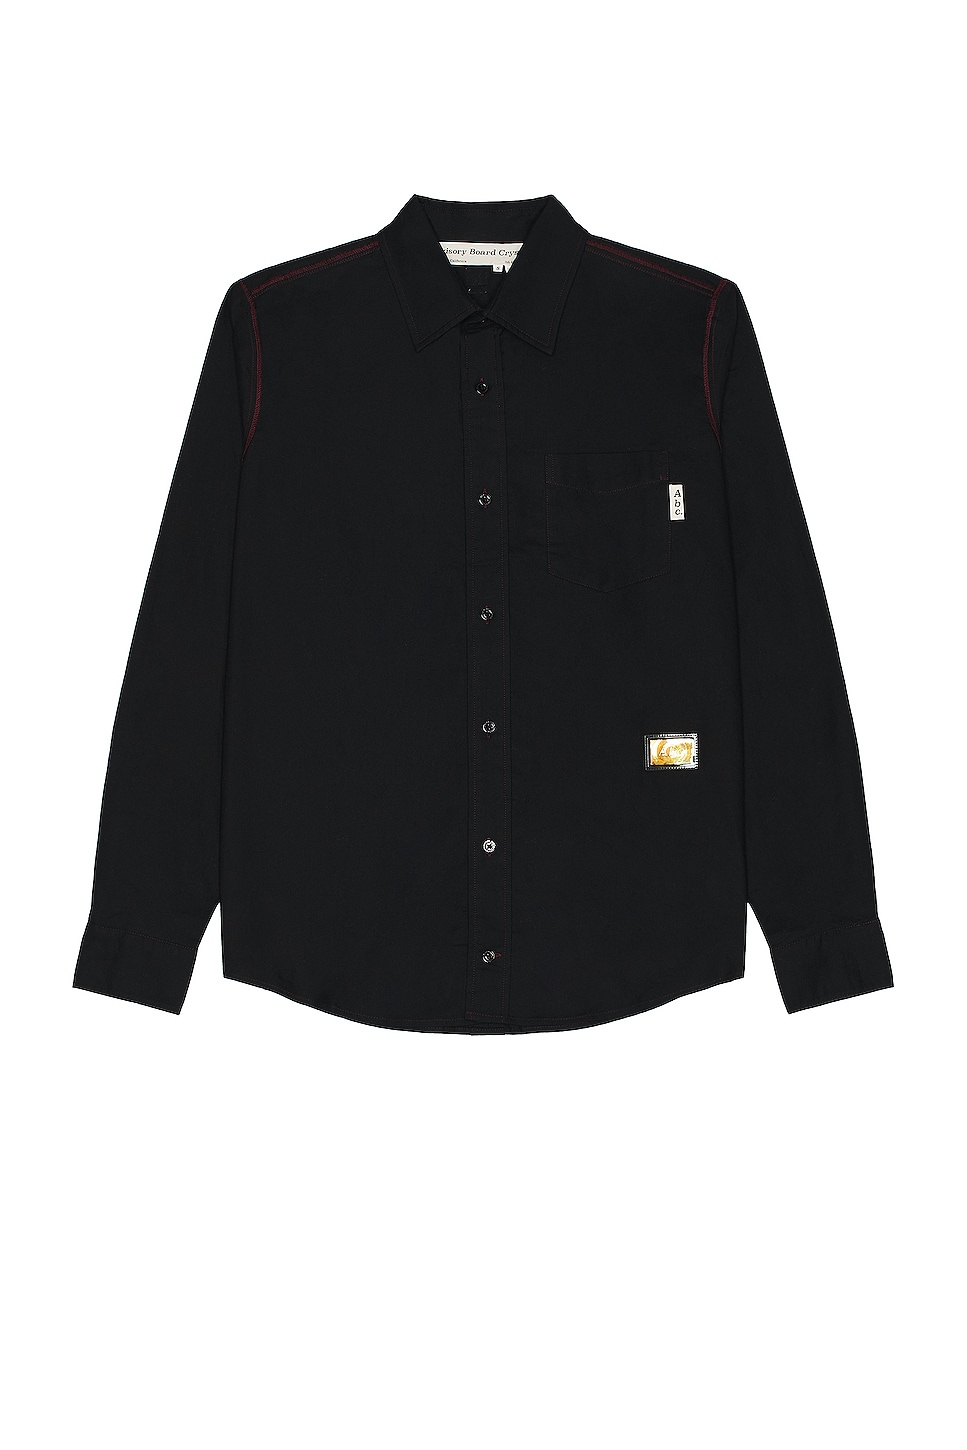 Image 1 of Advisory Board Crystals Oxford Shirt in Black